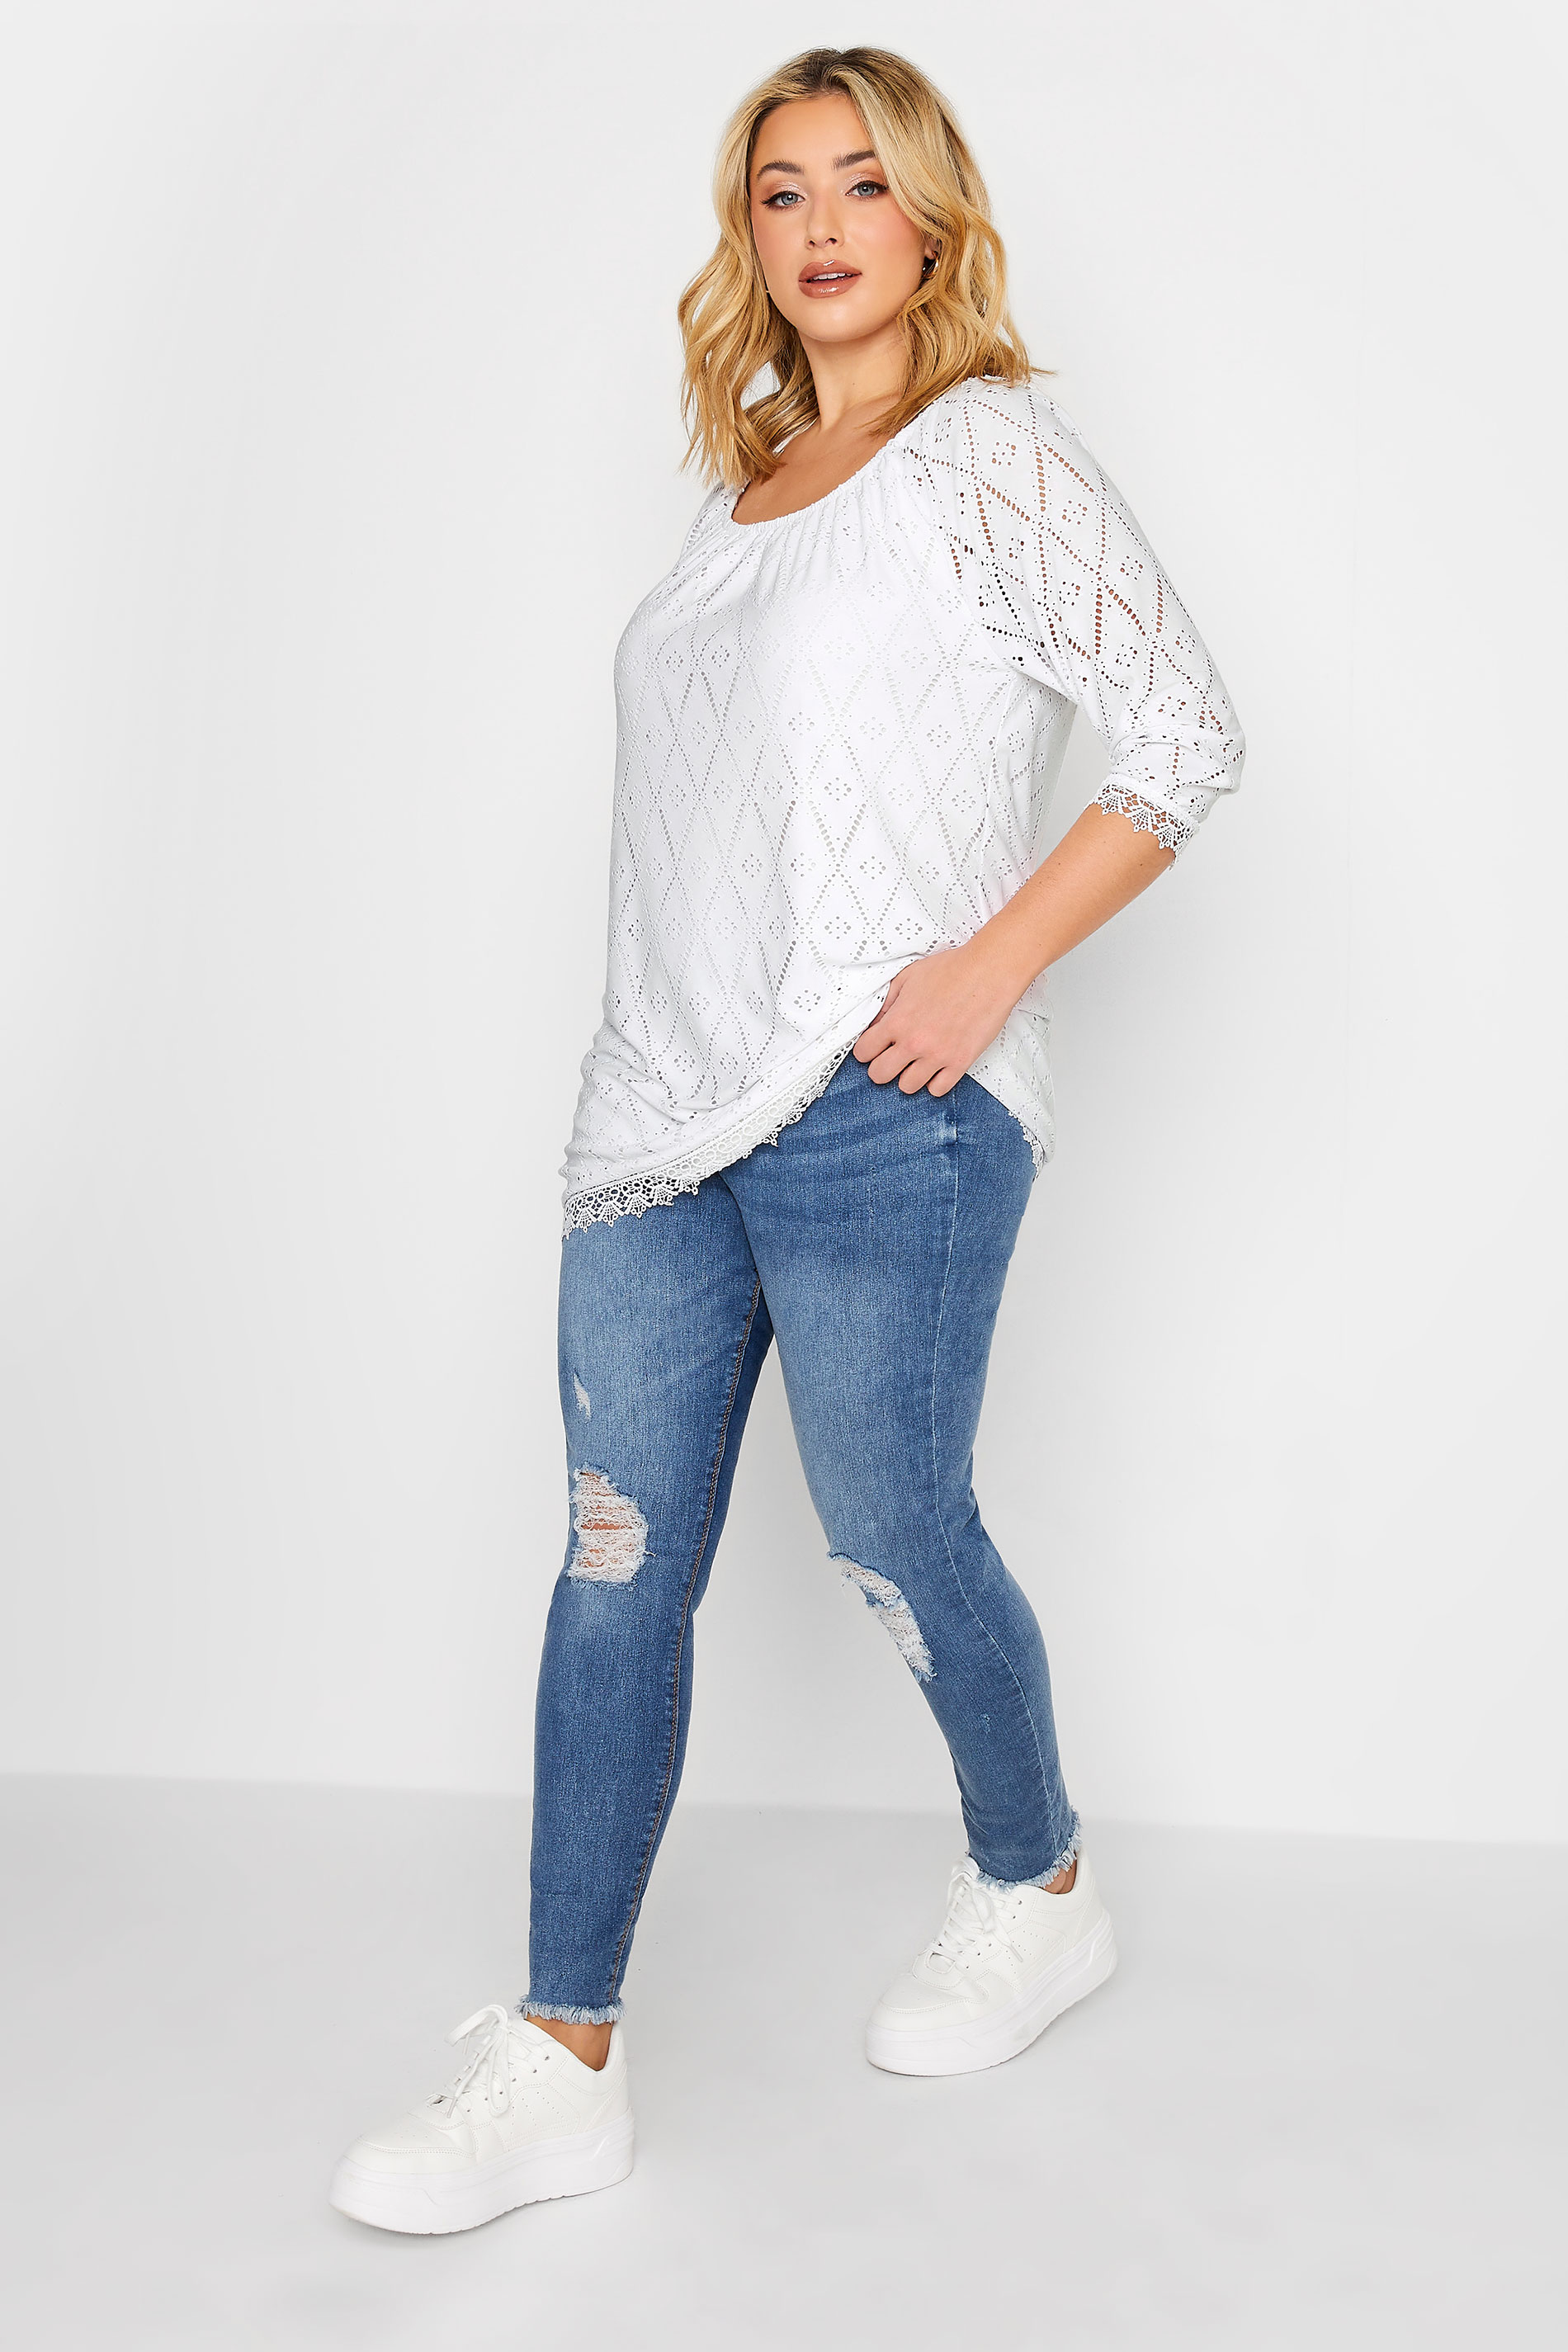 YOURS Plus Size White Pointelle Lace Trim Top | Yours Clothing 2